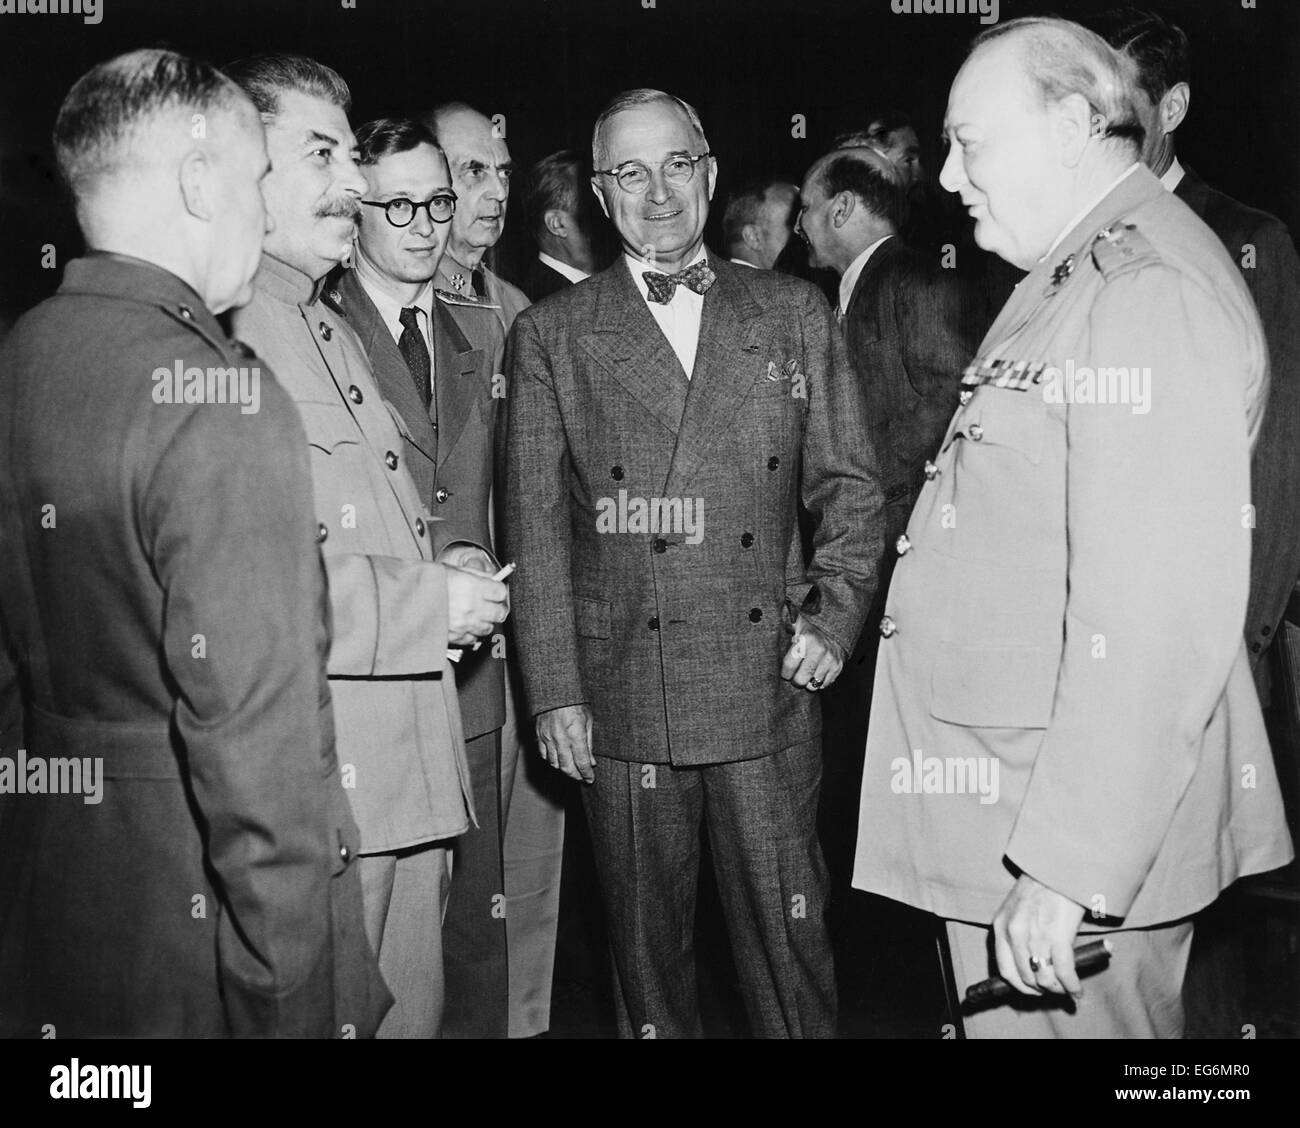 Allied leaders at the Potsdam Conference, July 17- Aug. 2, 1945. L-R: George Marshall, Joseph Stalin, unidentified, William Stock Photo